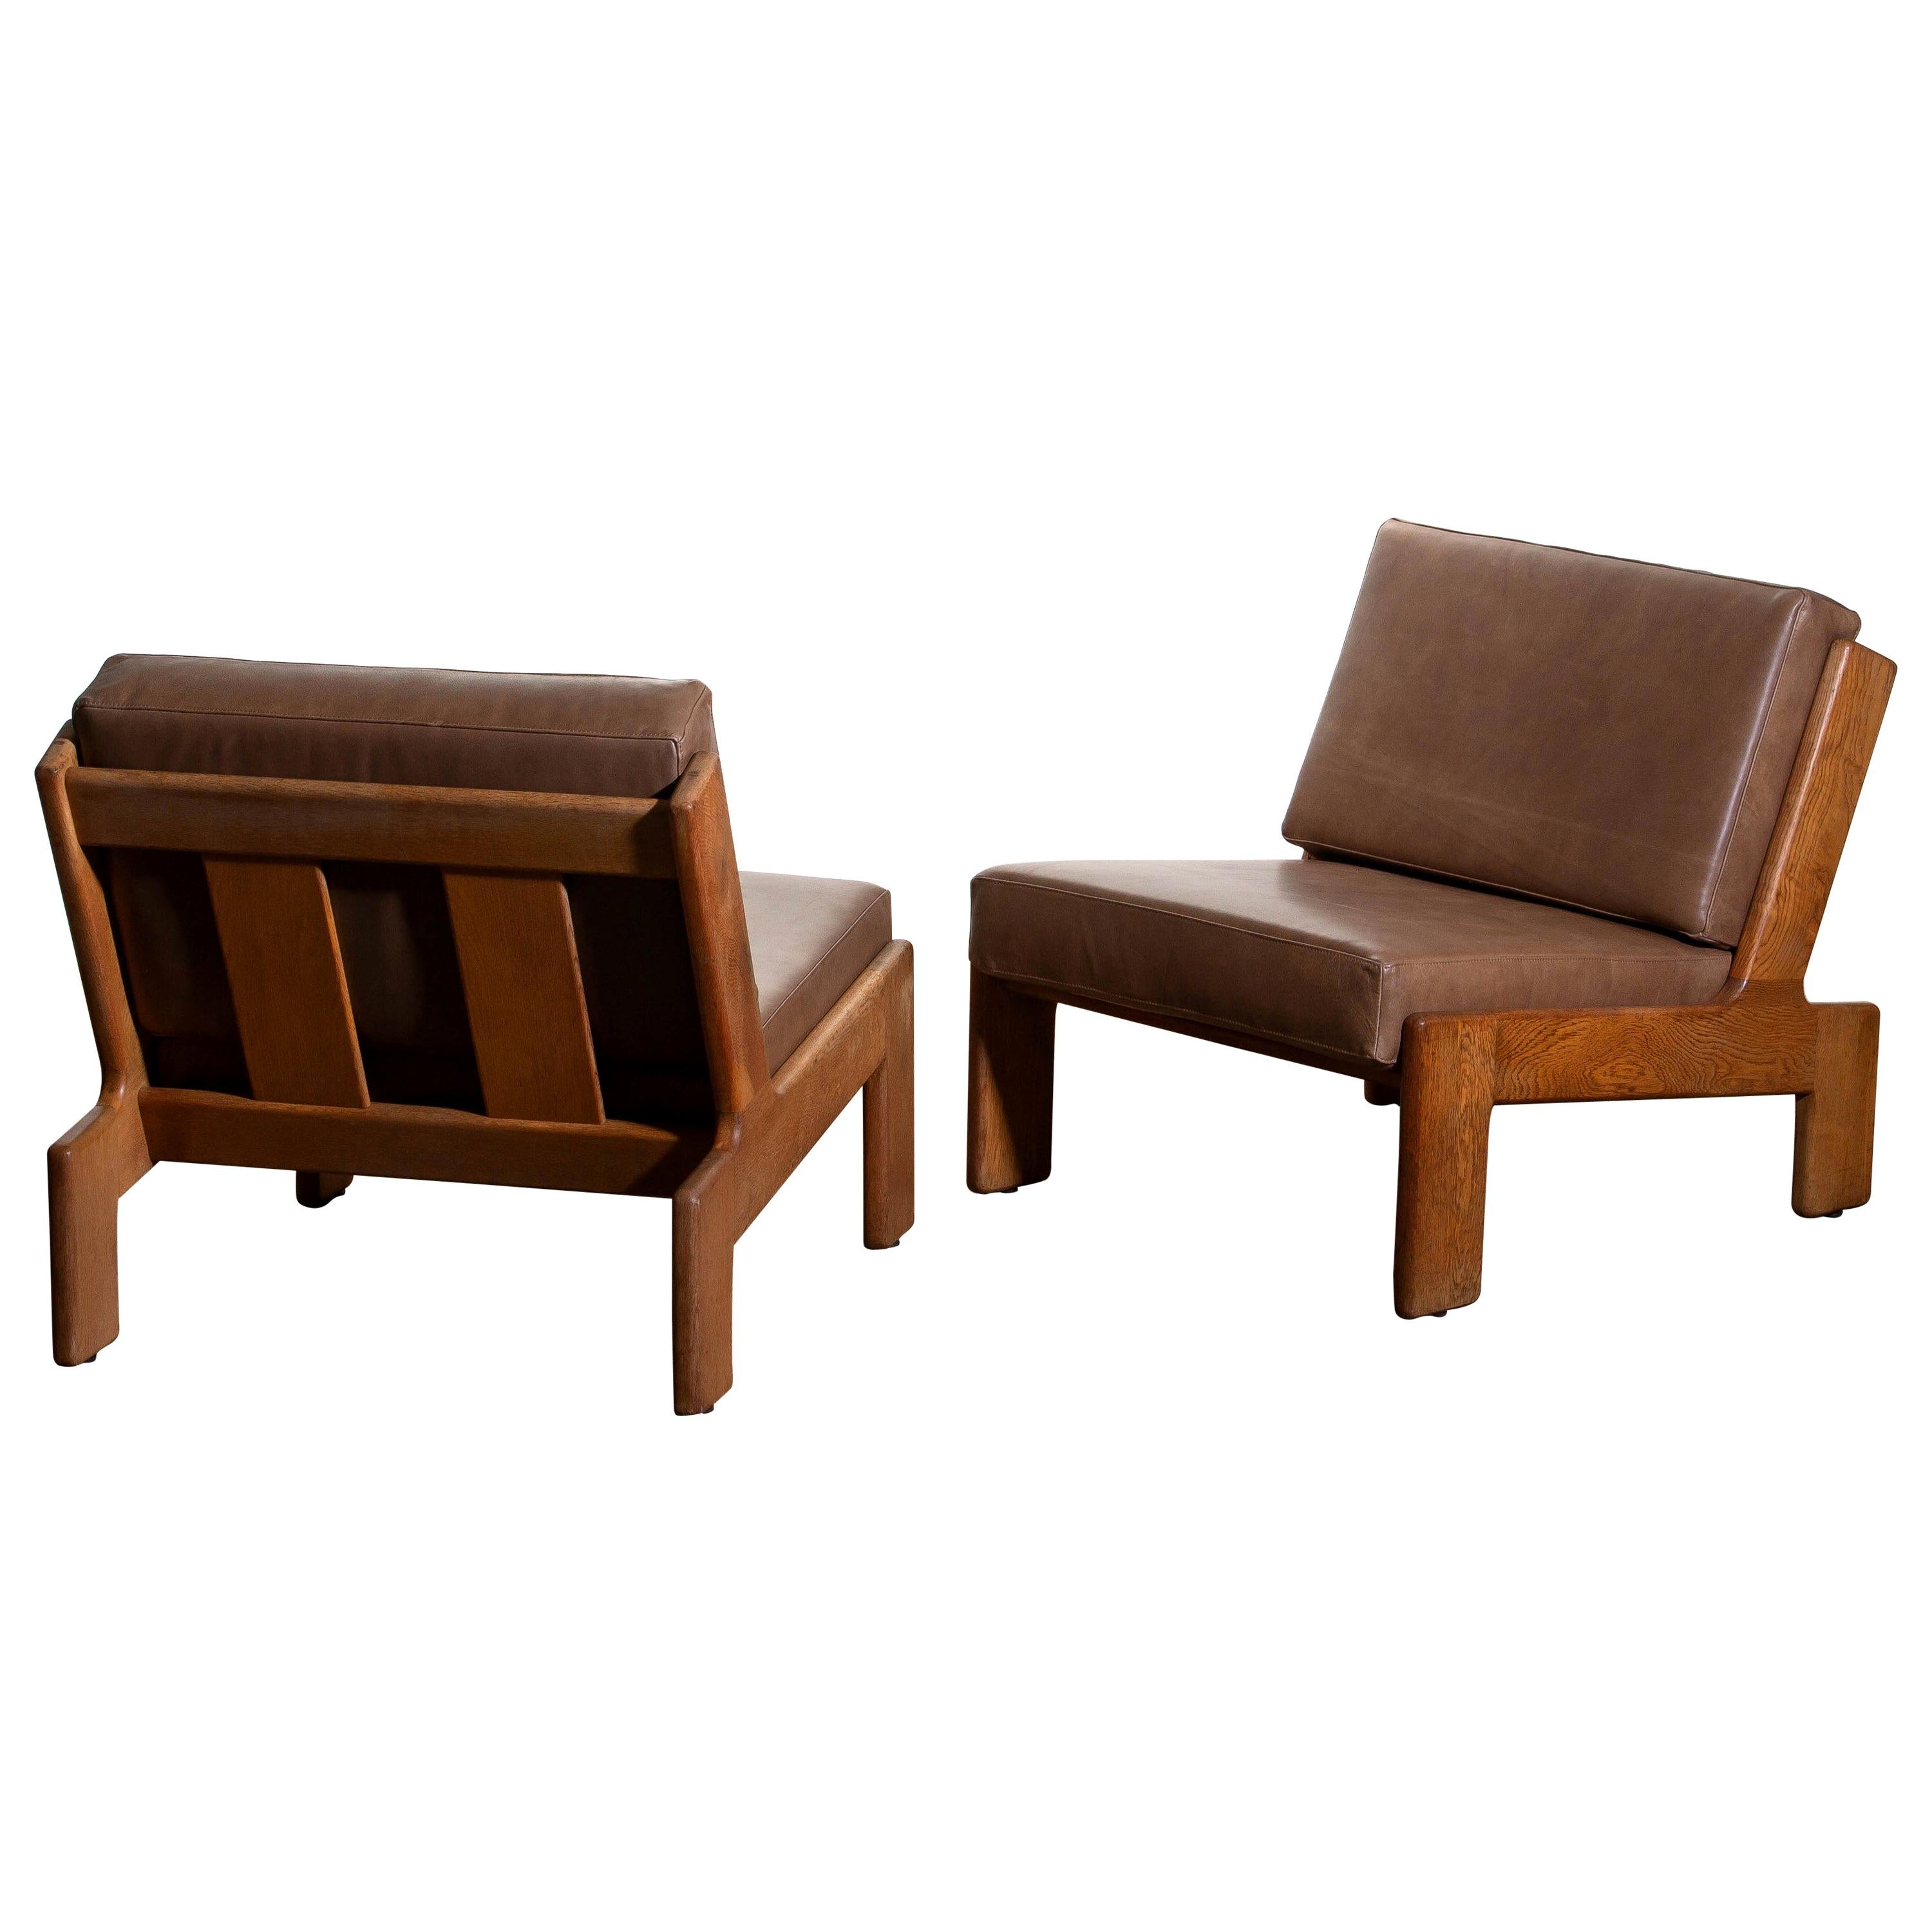 Mid-20th Century 1960s, Pair of Oak and Leather Cubist Lounge Chairs by Esko Pajamies for Asko